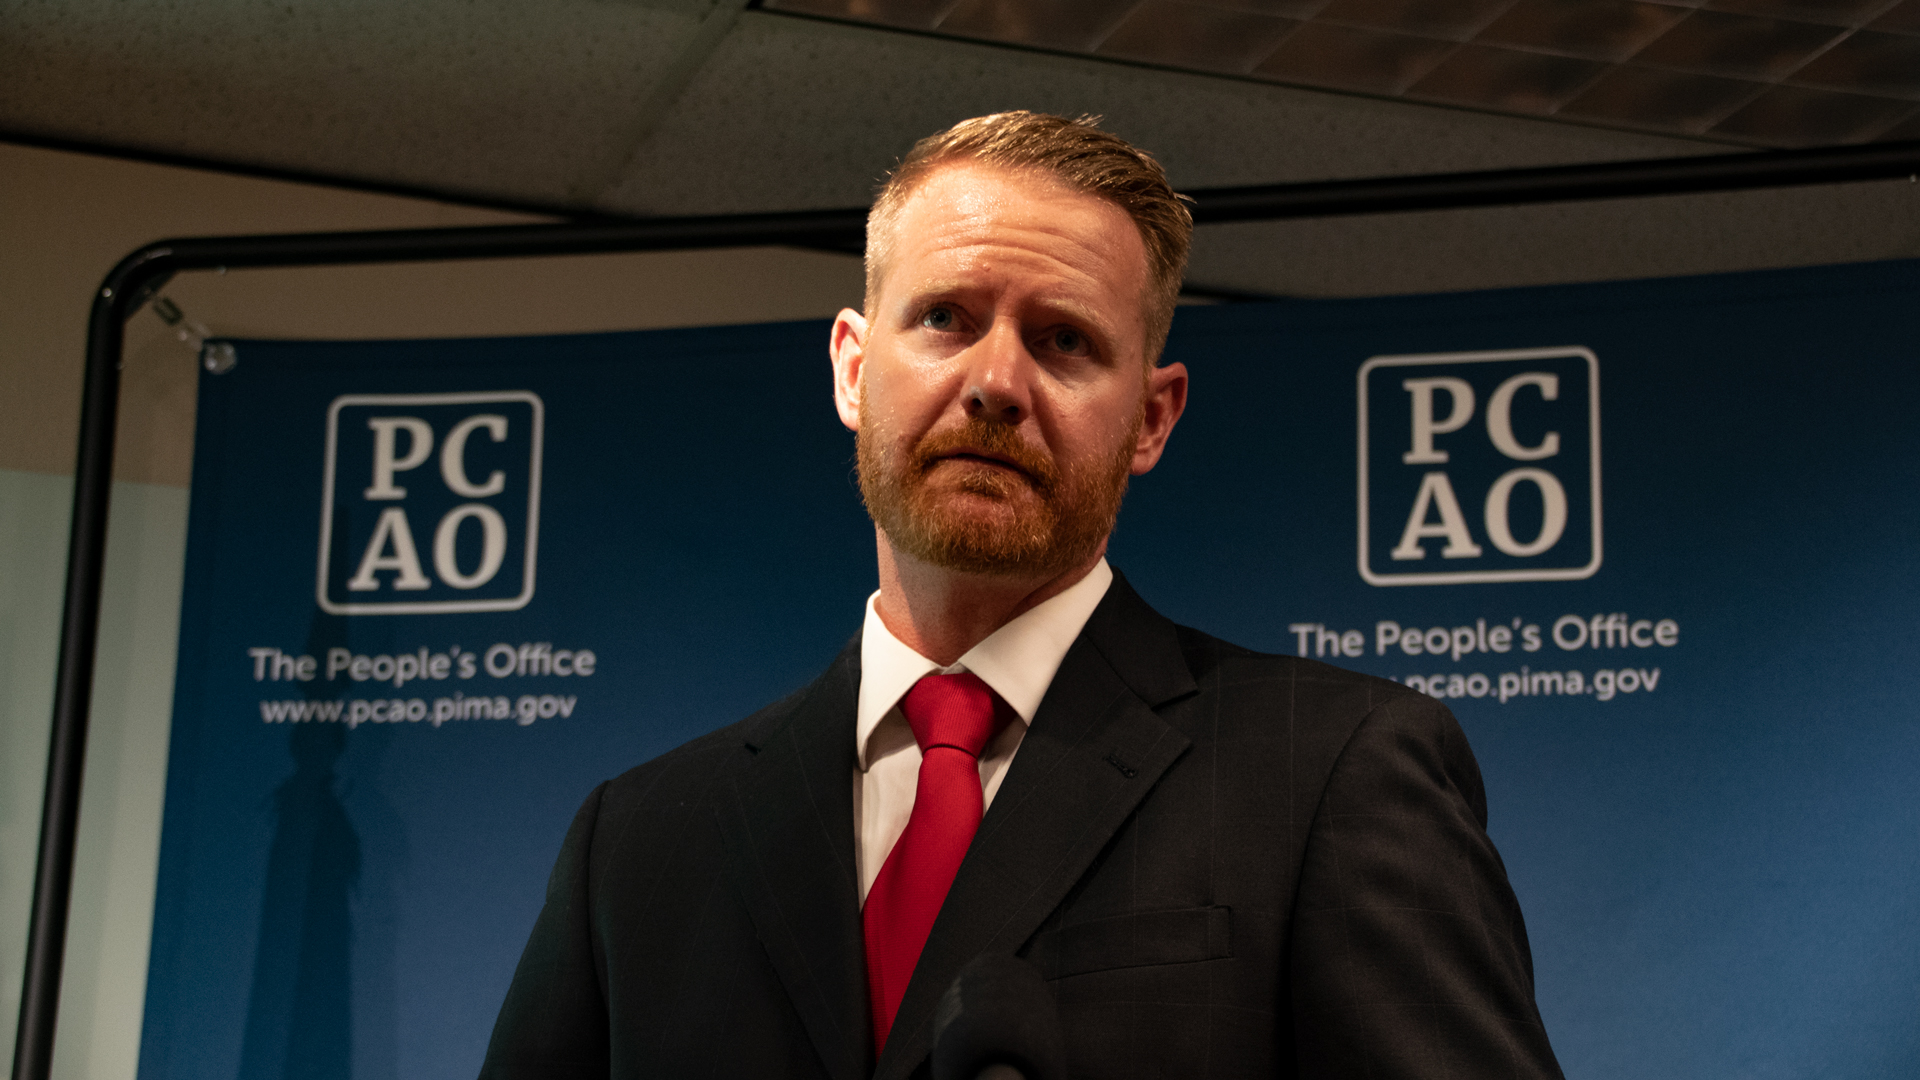 Dan South, Chief Criminal Deputy at the Pima County Attorney's Office, at a news conference. August 3, 2021